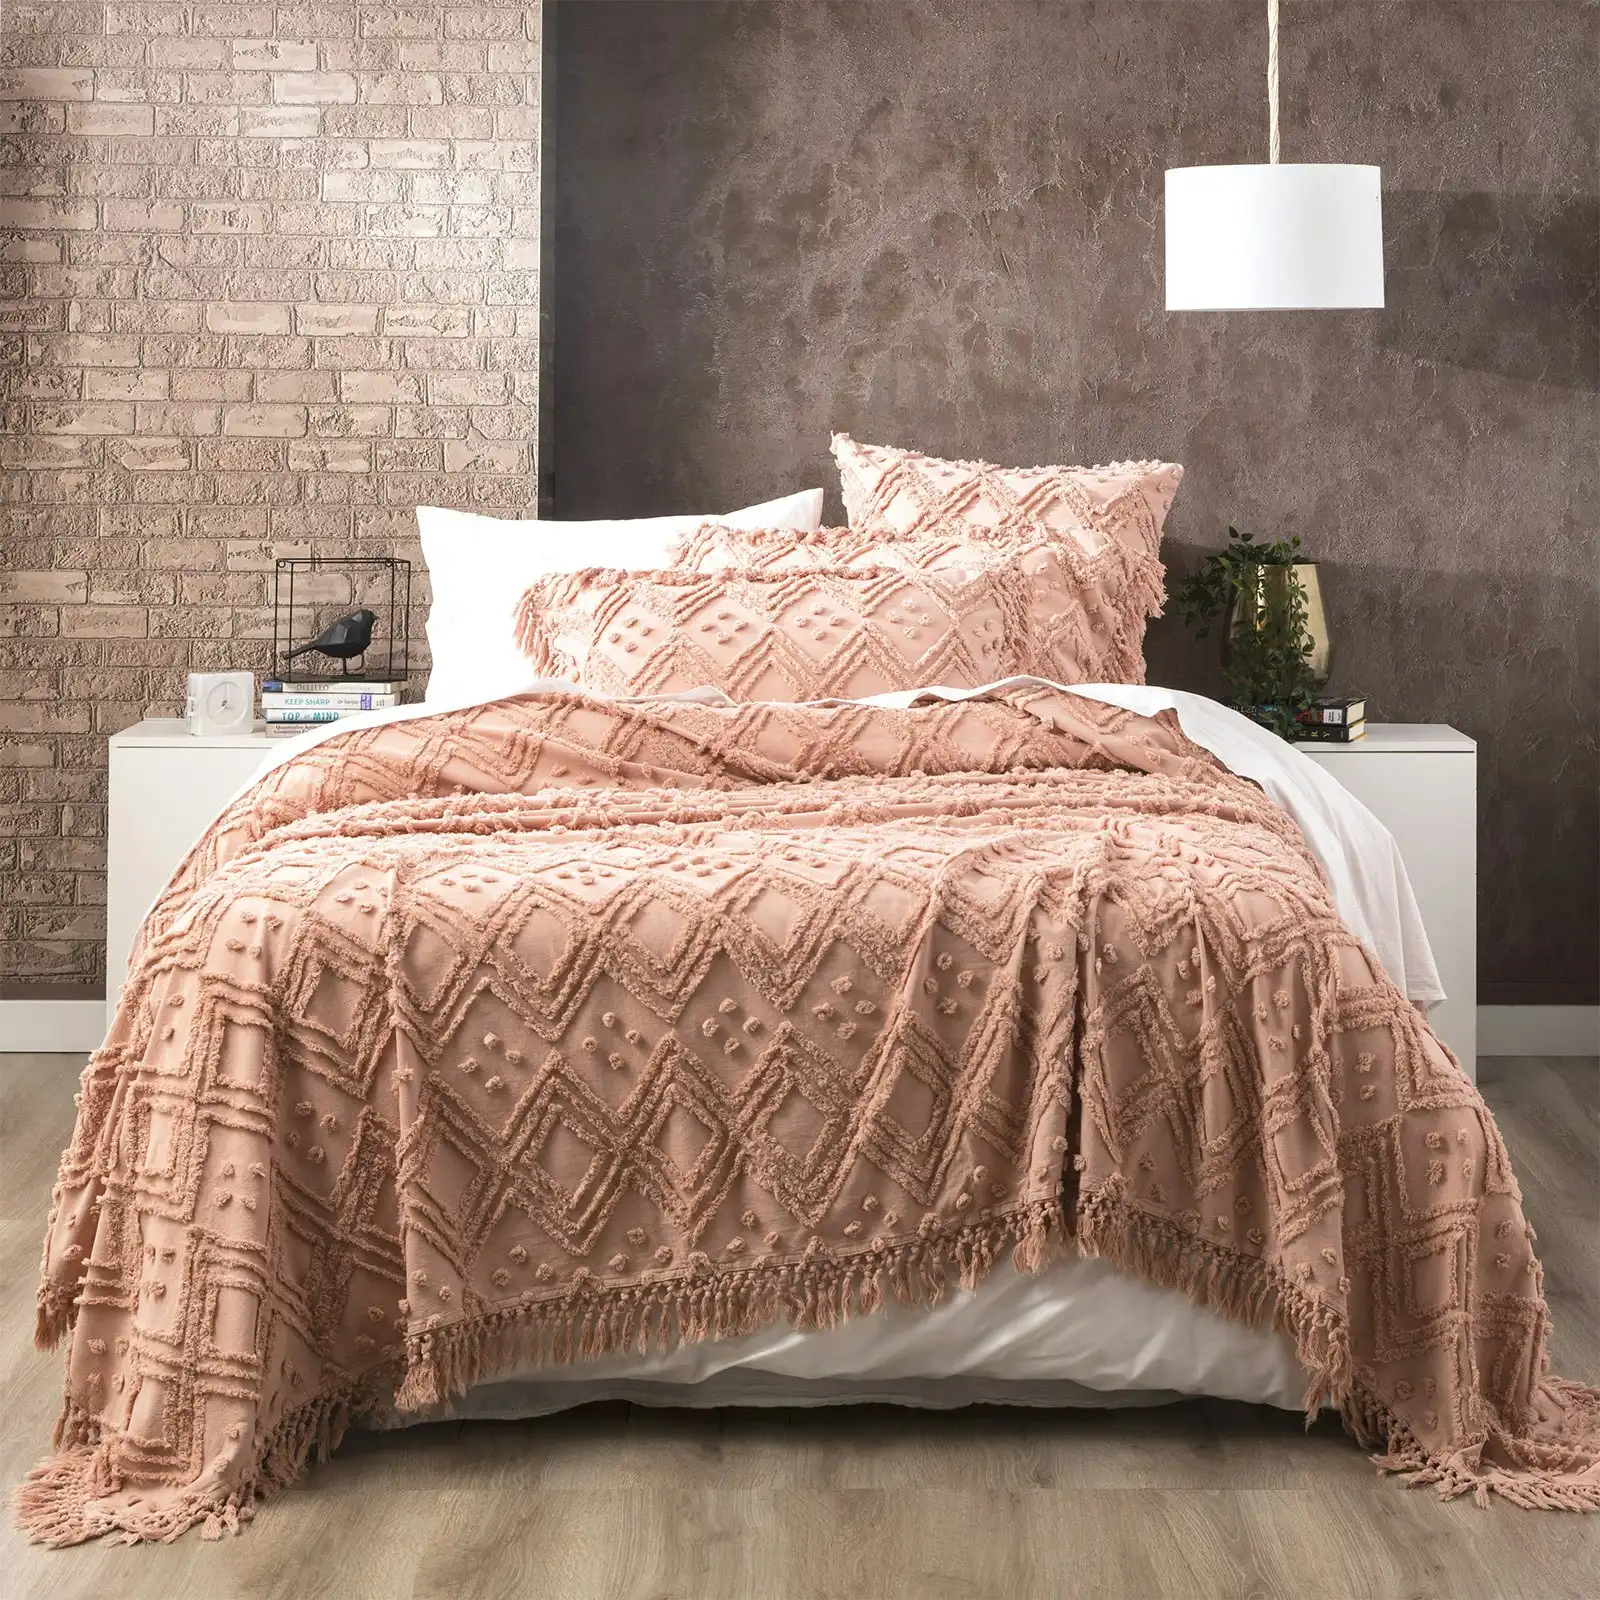 Park Avenue Medallion Queen/King Bed Cover Cotton VT Wash Tuffted Bedding Blush